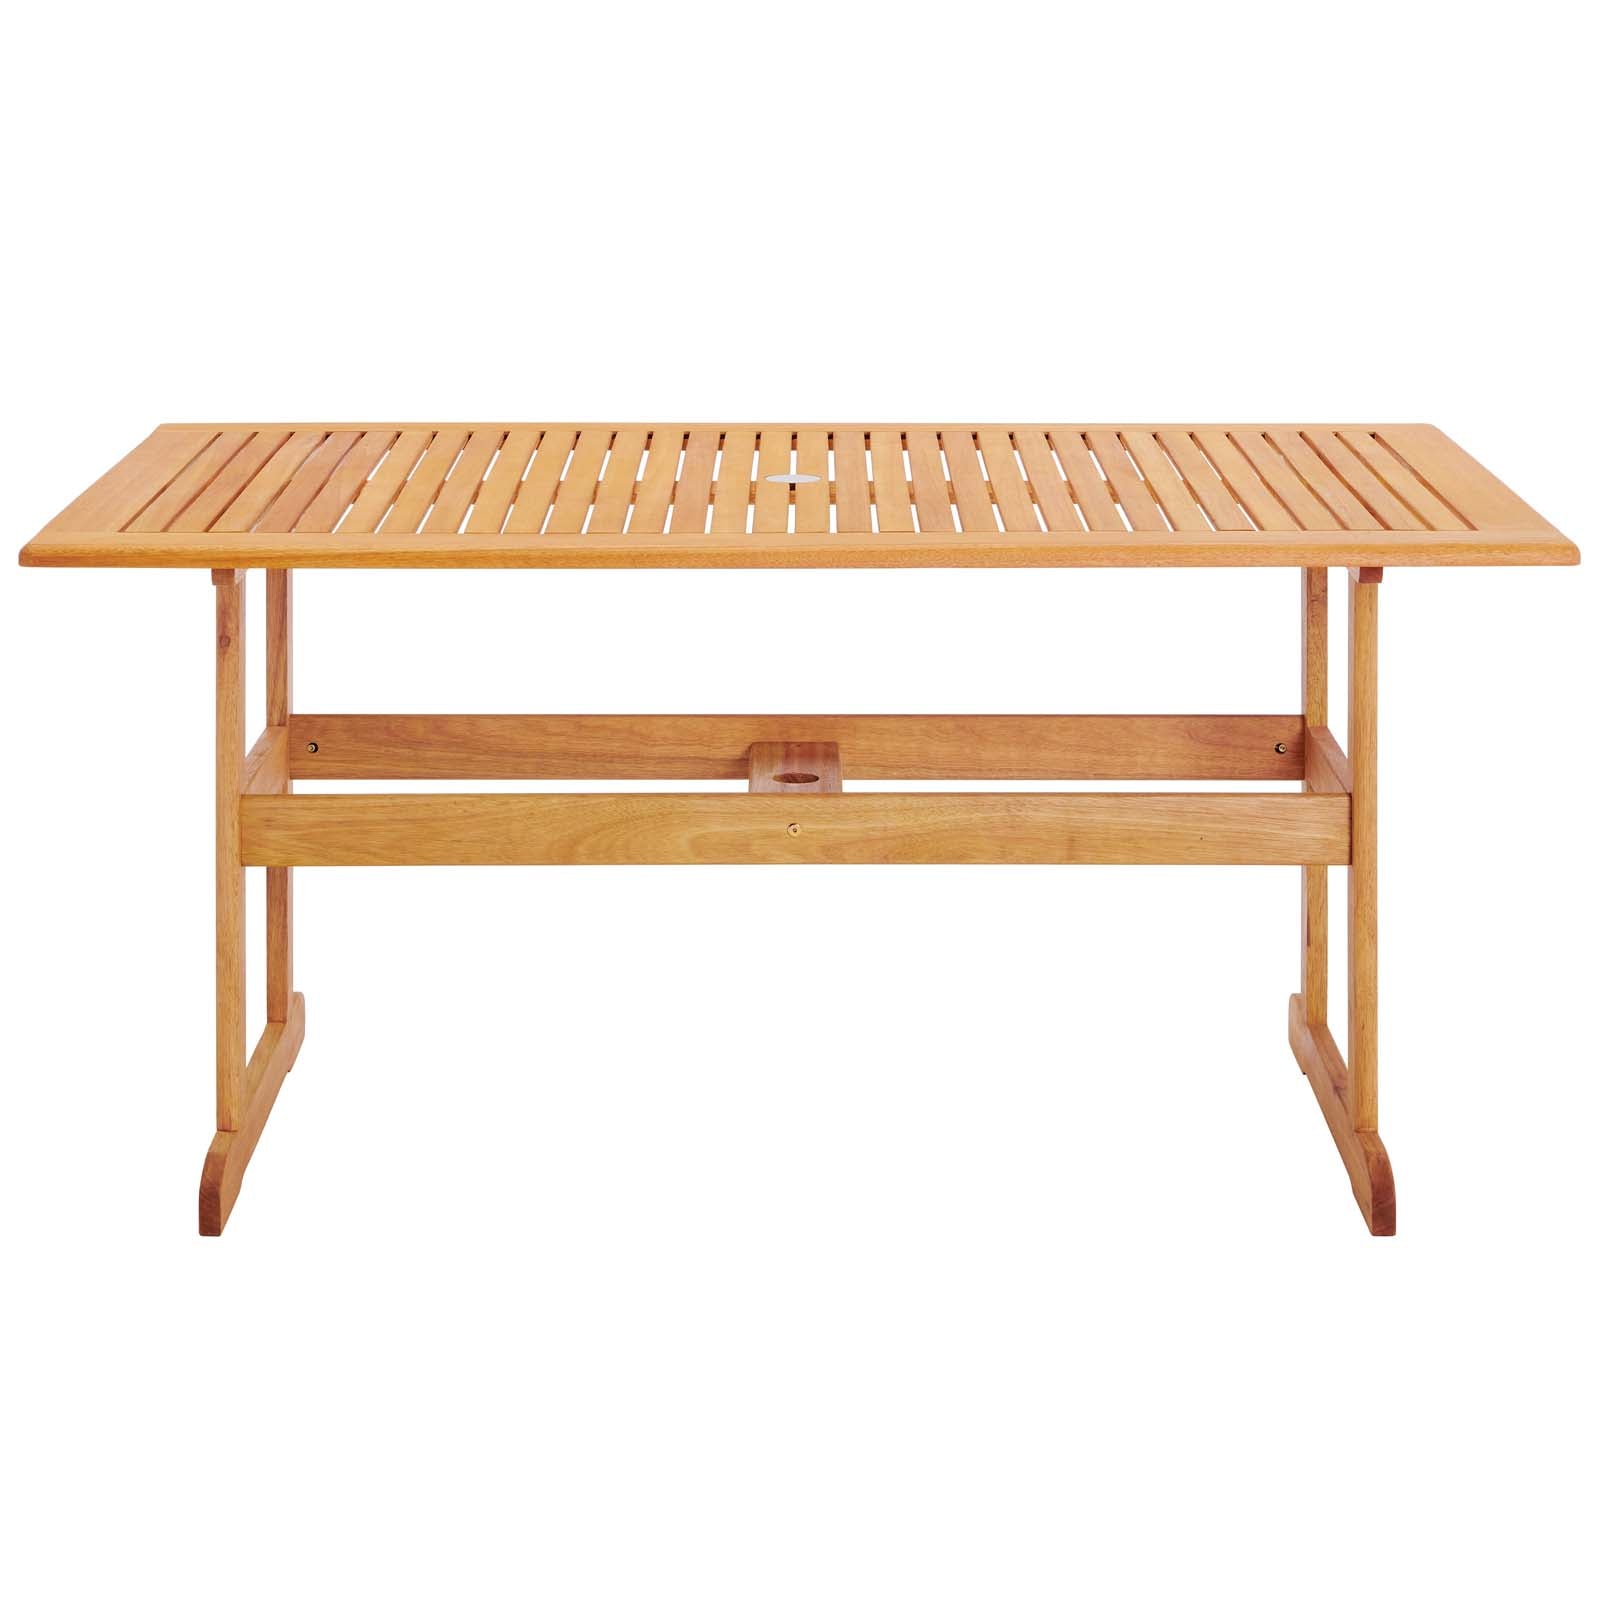 Modway Outdoor Dining Tables - Hatteras 59" Rectangle Outdoor Patio Eucalyptus Wood Dining Table Natural